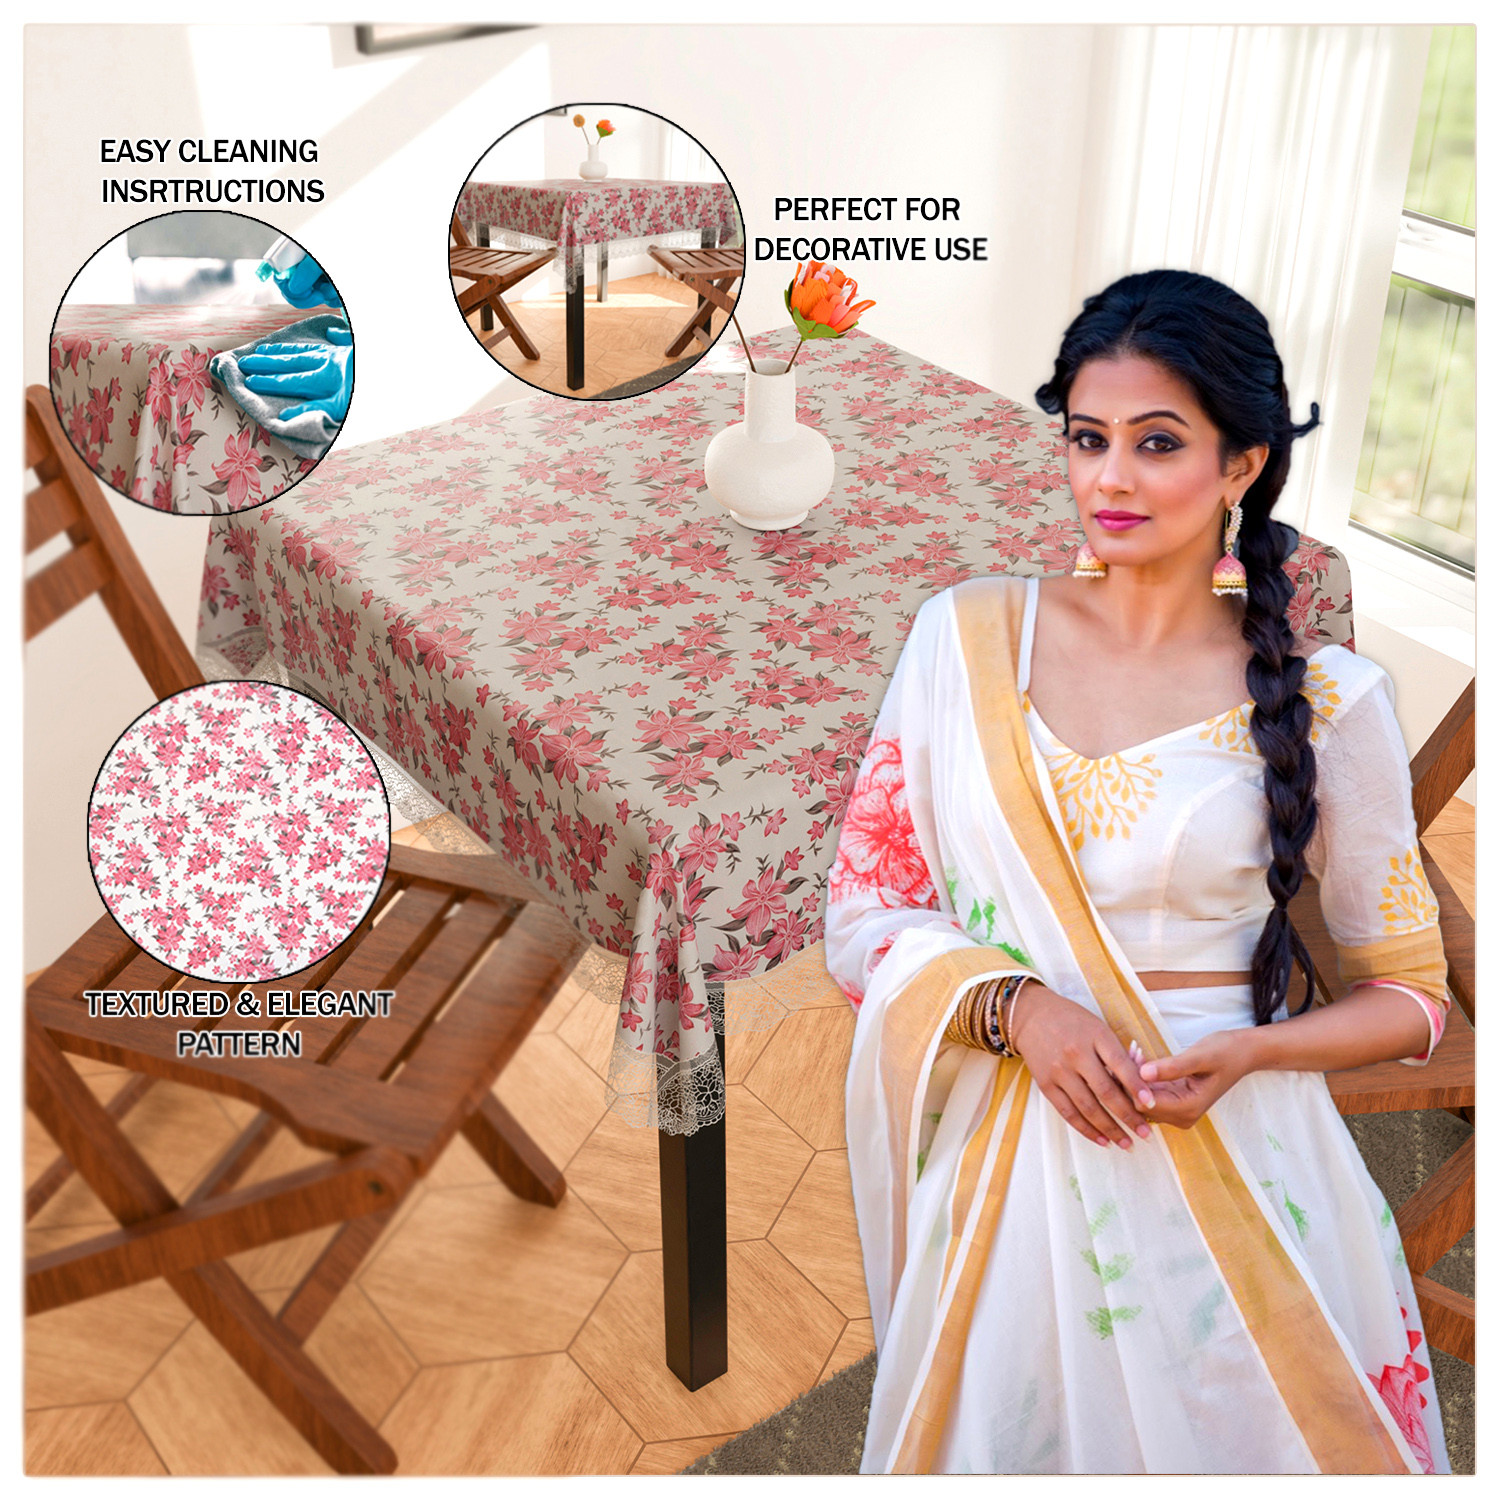 Kuber Industries Square Table Cover for 4 Seater|PVC Waterproof Flower Pattern Tablecloth Indoor & Outdoor|48x48 Inch (White)